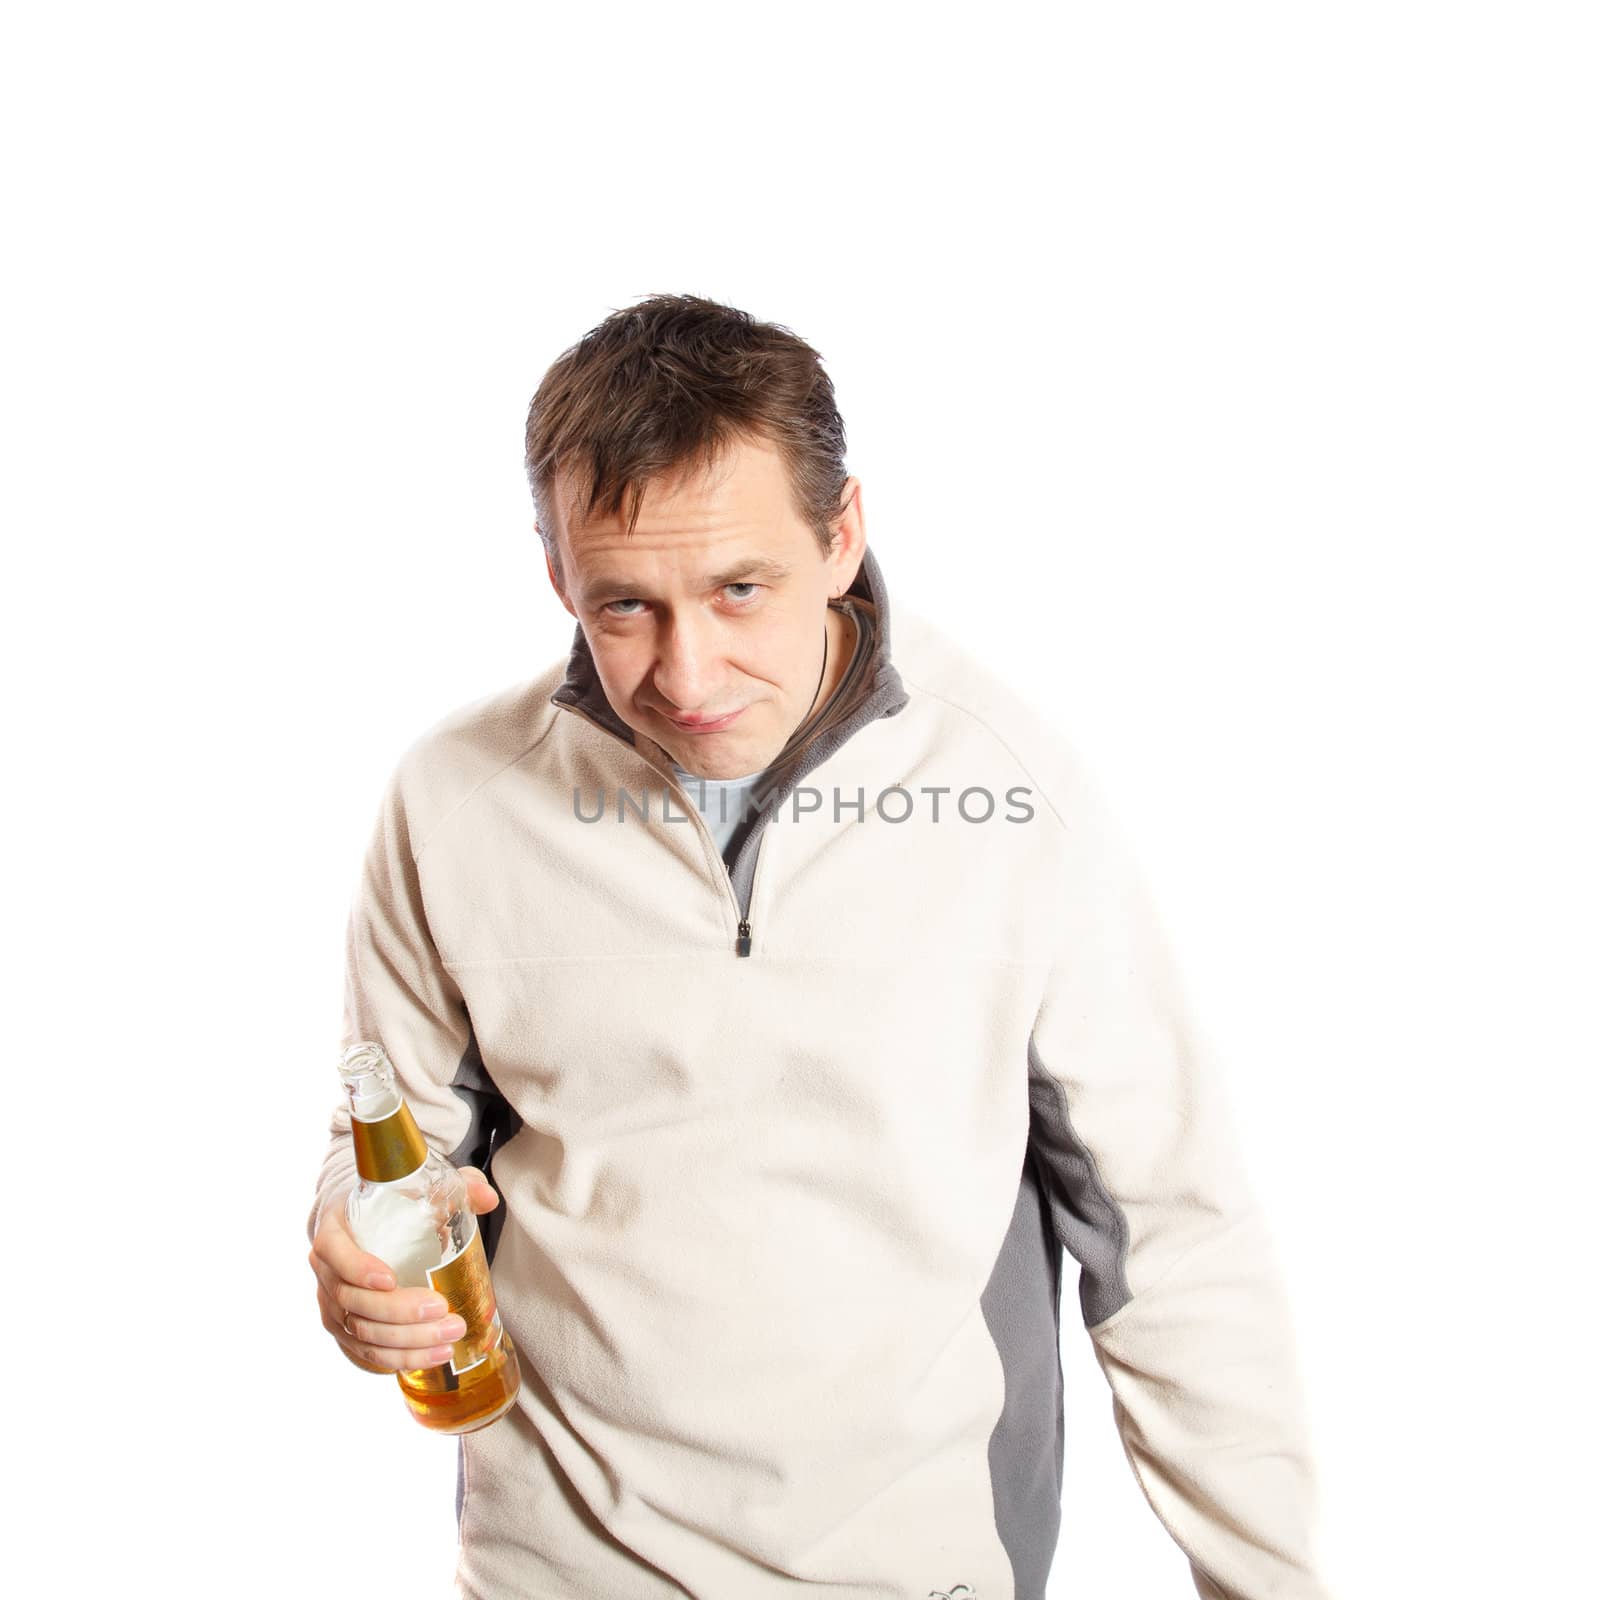 Drunk man with bottle of beer on a white background